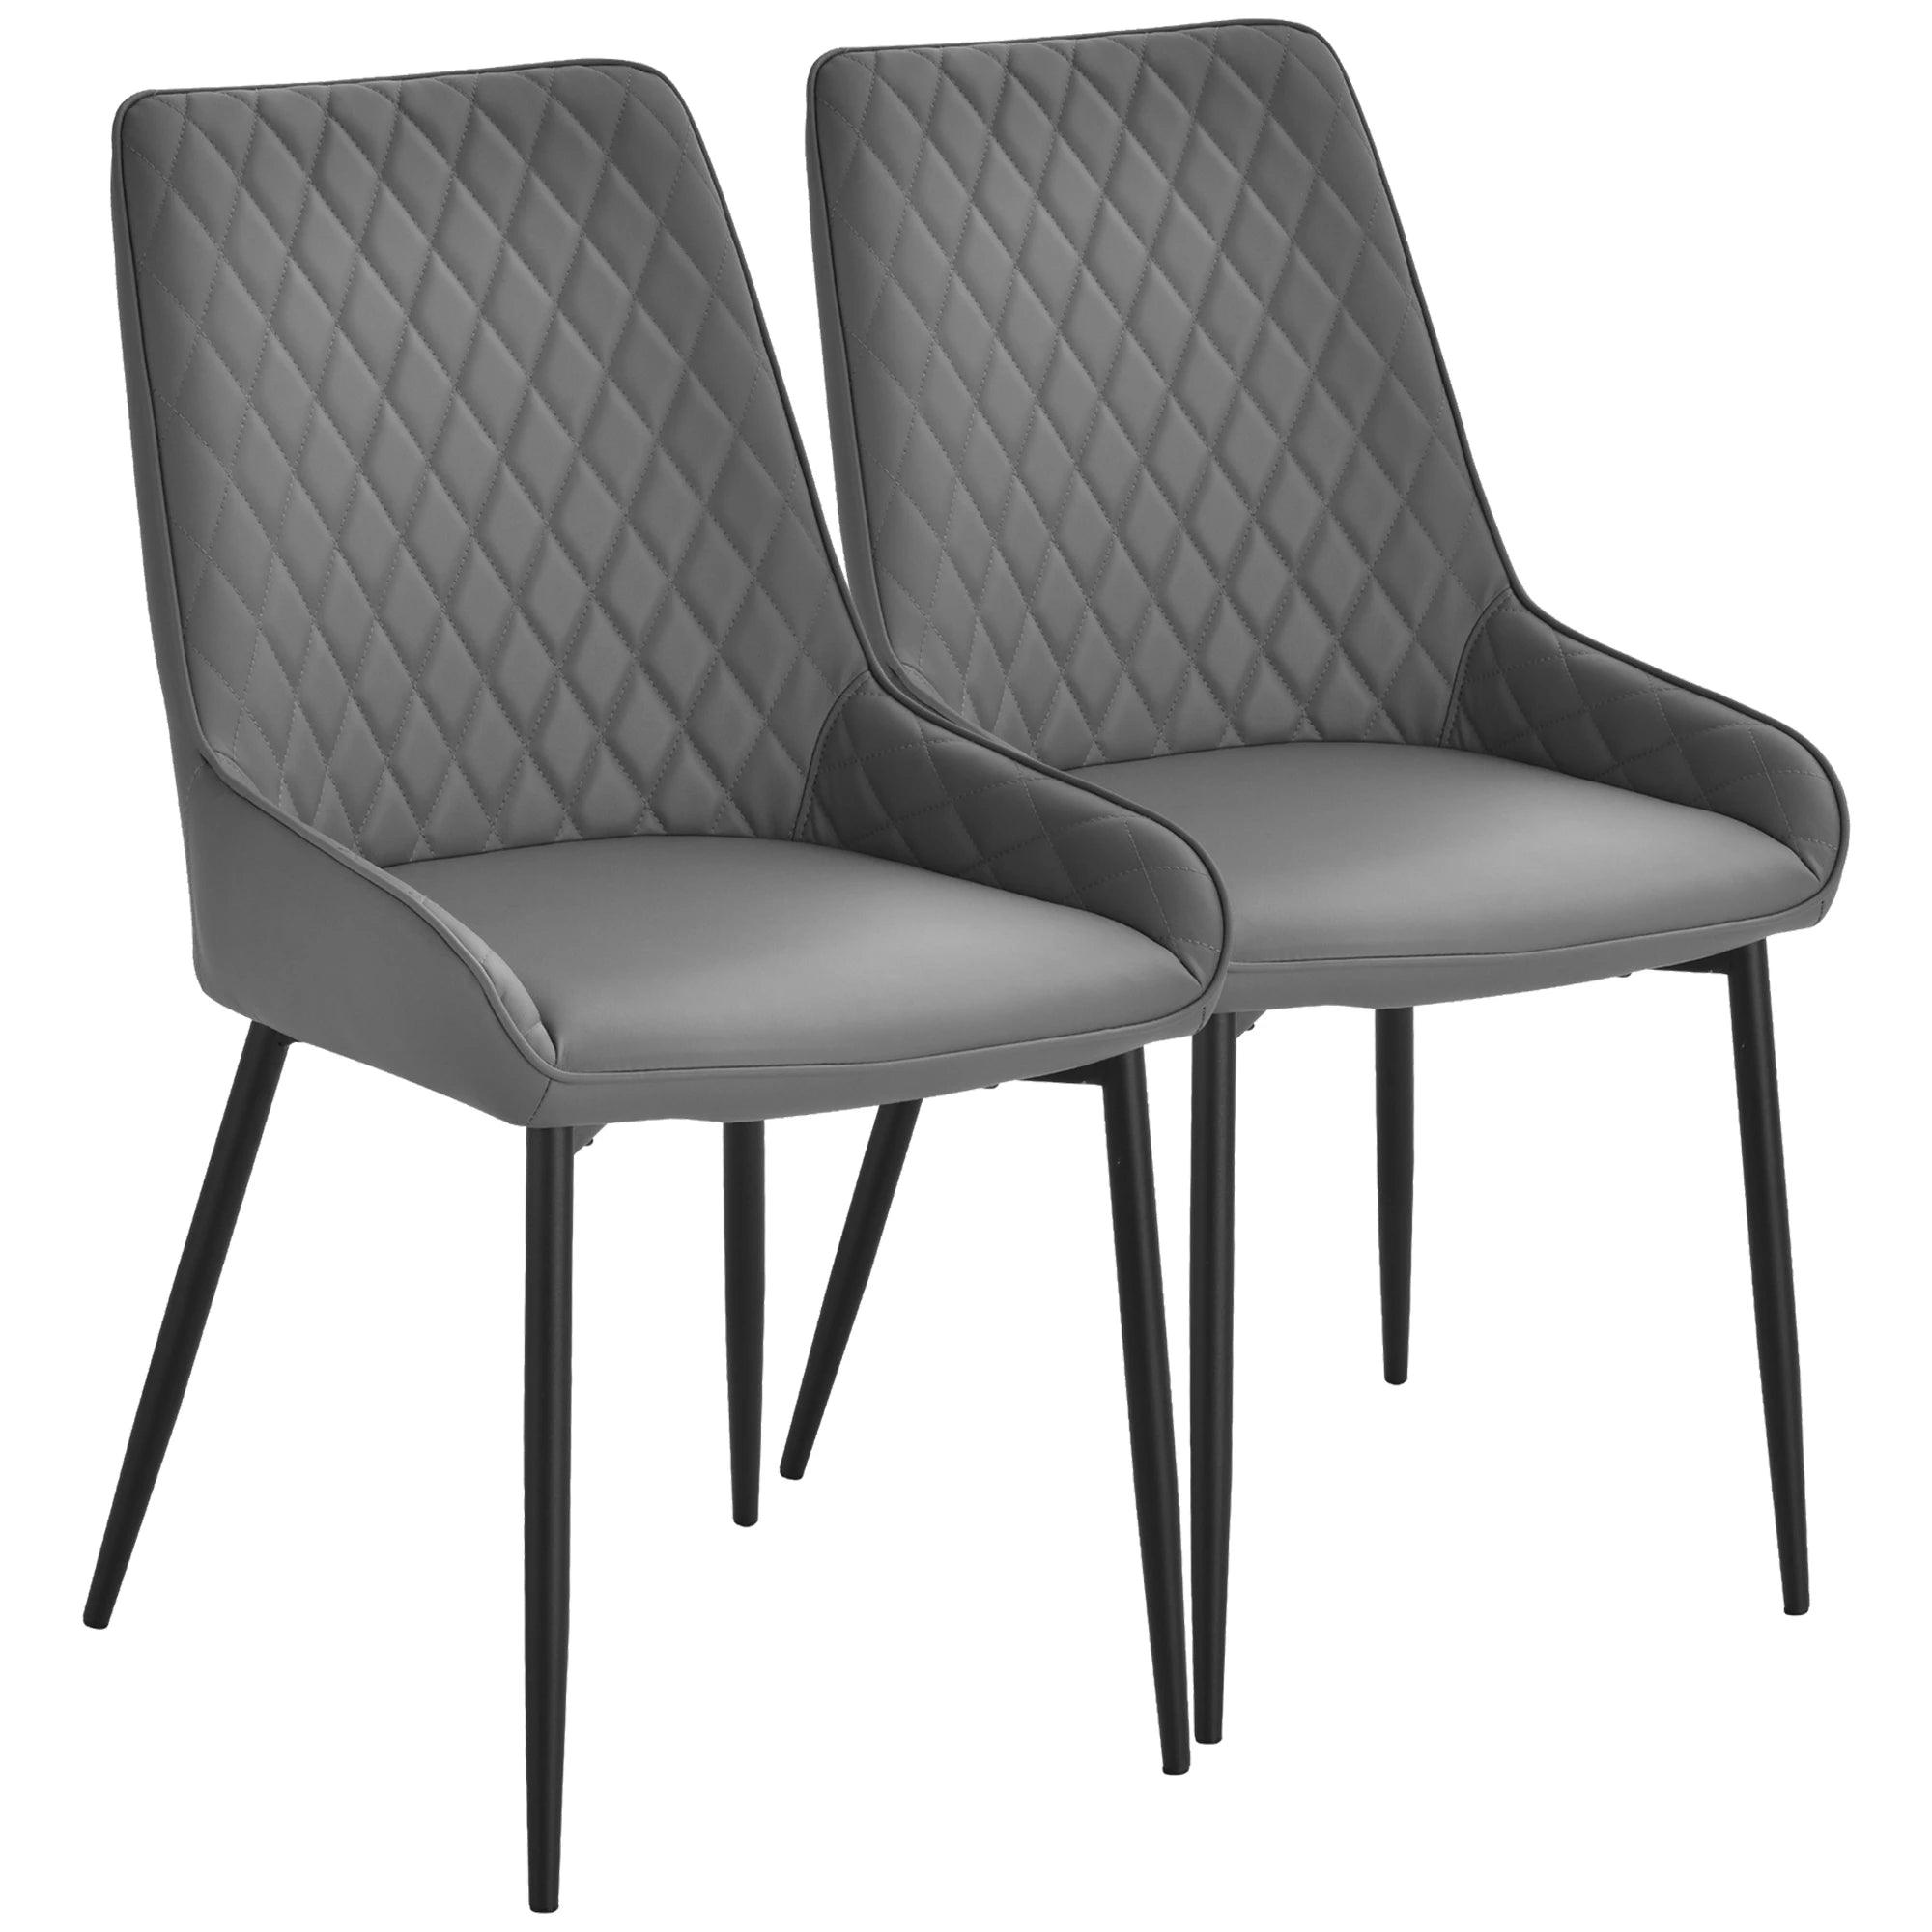 Dining Chairs Set of 2, Modern PU Leather Upholstered Kitchen Chairs